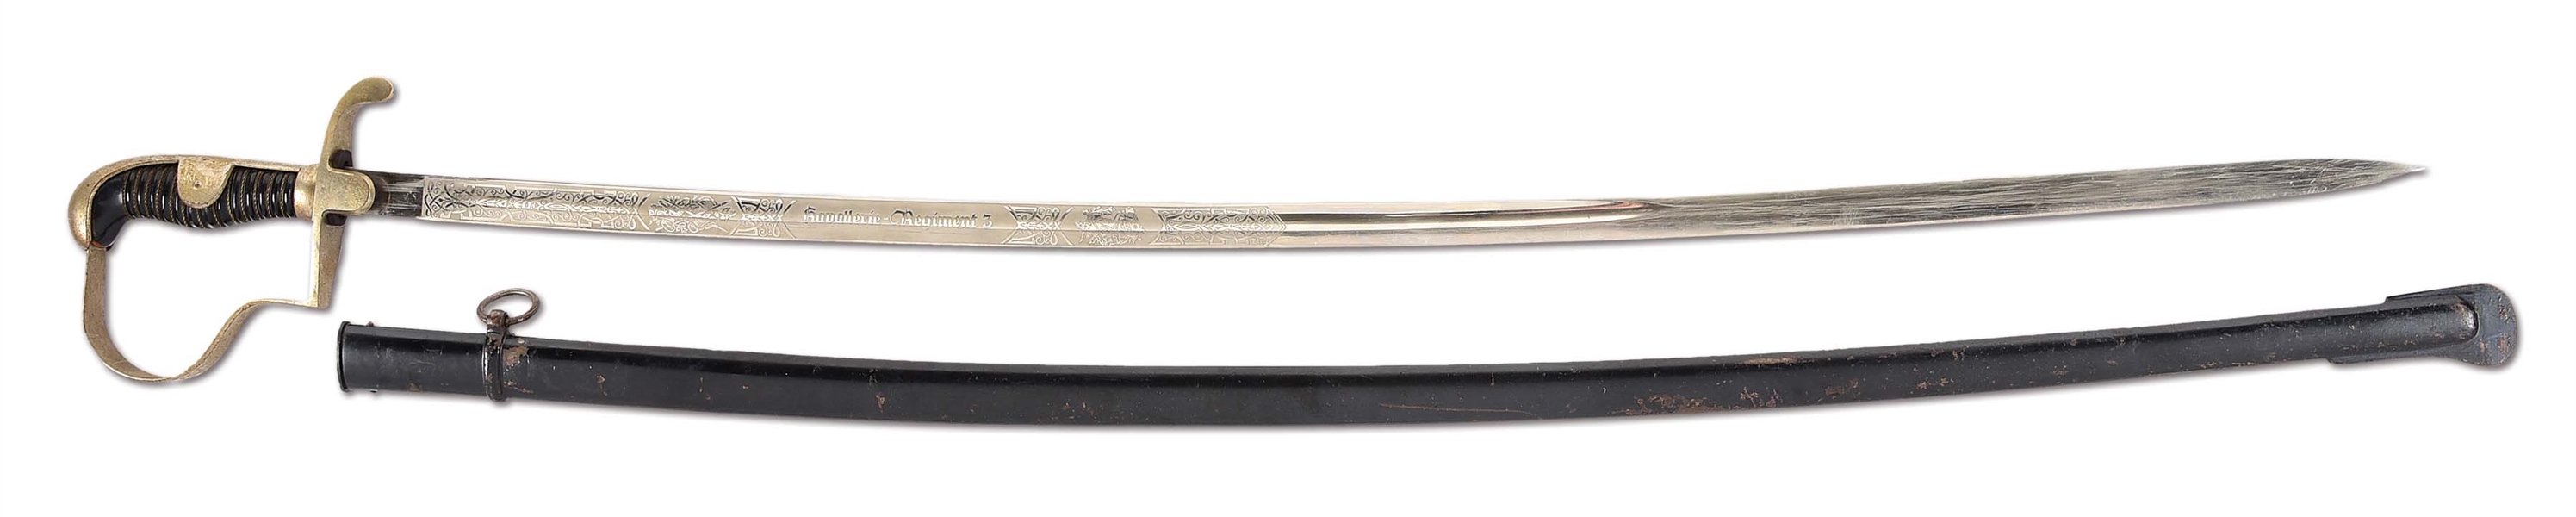 WWI "CAVALRY REGIMENT 3" SWORD  WITH TRIPLE ETCHED BLADE.